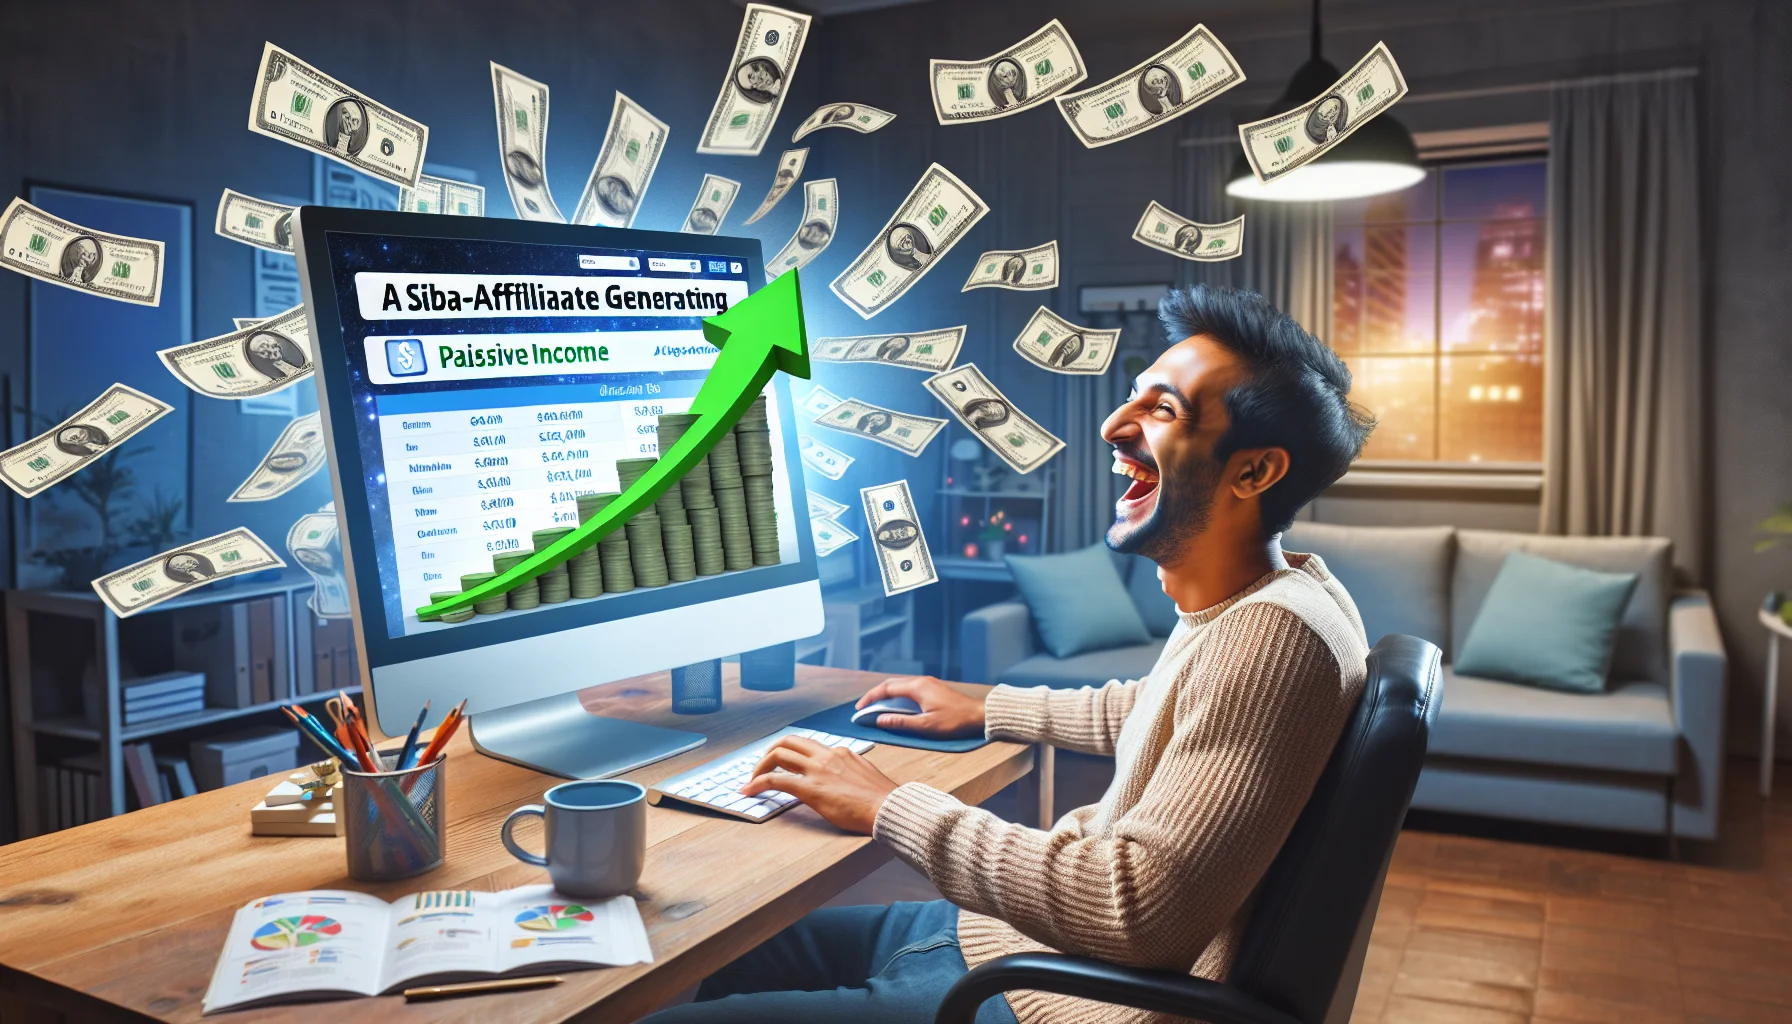 A humorous, realistic image of a sub-affiliate generating passive income online. The image displays a South Asian man sitting in a cozy home office, laughing as he watches a computer screen that shows increasing earnings in an affiliate marketing dashboard, with a dollar sign icon growing larger. Dollar bills are creatively swirling around him, symbolizing the flow of income. The room is brightly lit, filled with technology gadgets, and echoes an atmosphere of comfort and productivity.